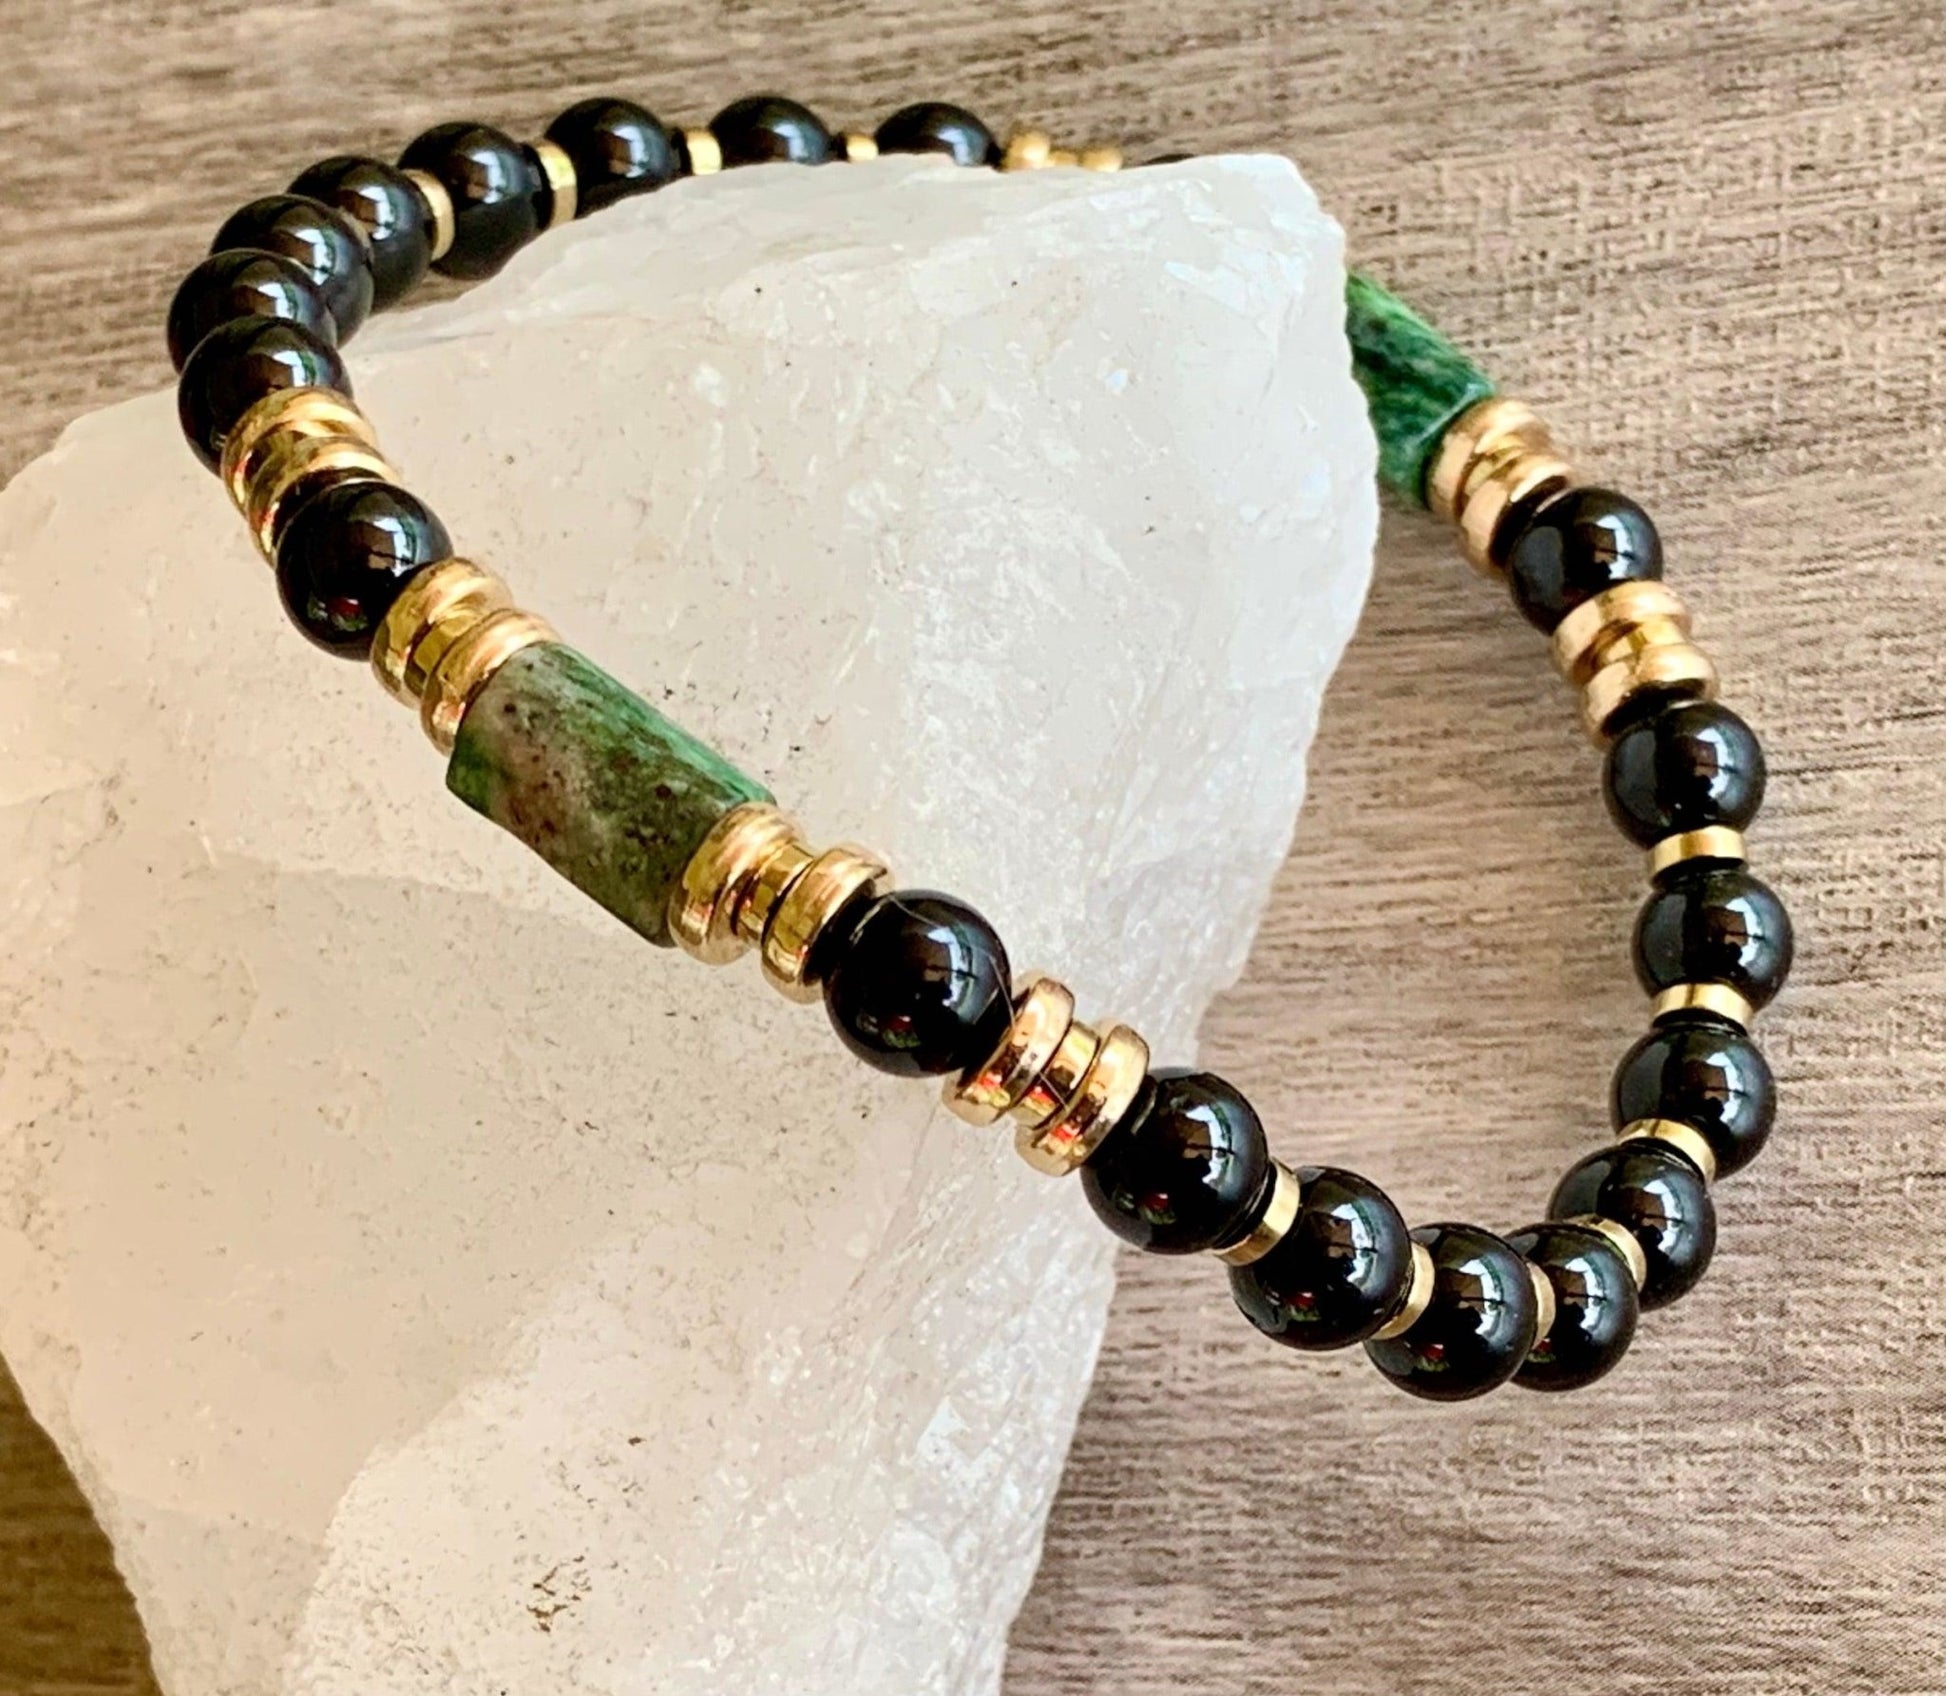 🔴SOLD🔴 Cole Handmade Raw Emerald, Black Tourmaline, and Silver or Gold Plated Hematite Expandable Bracelet - Born Mystics